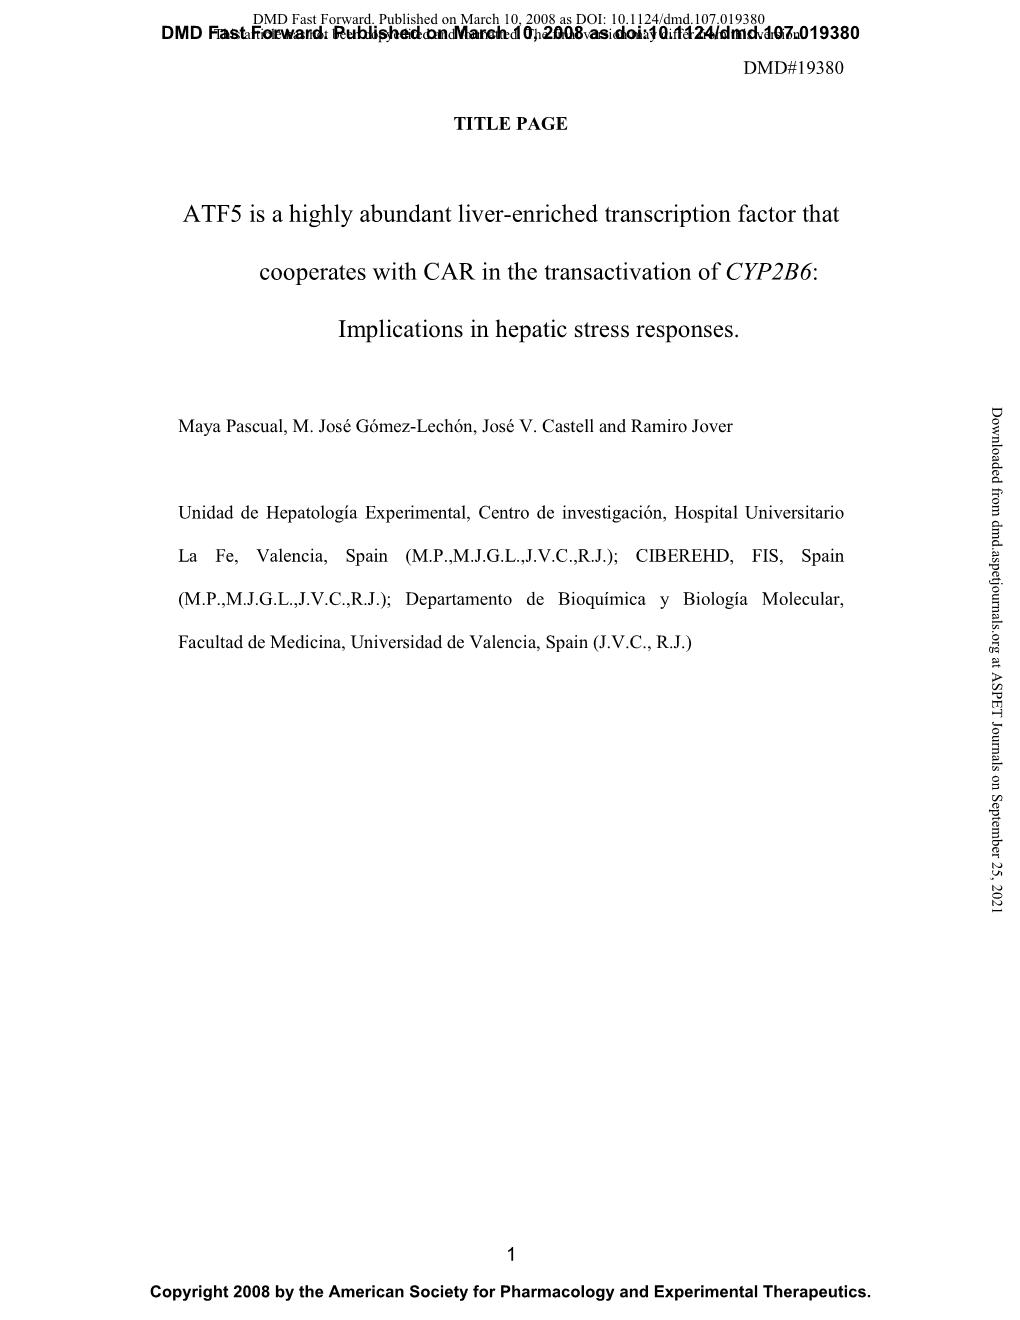 ATF5 Is a Highly Abundant Liver-Enriched Transcription Factor That Cooperates with CAR in the Transactivation of CYP2B6